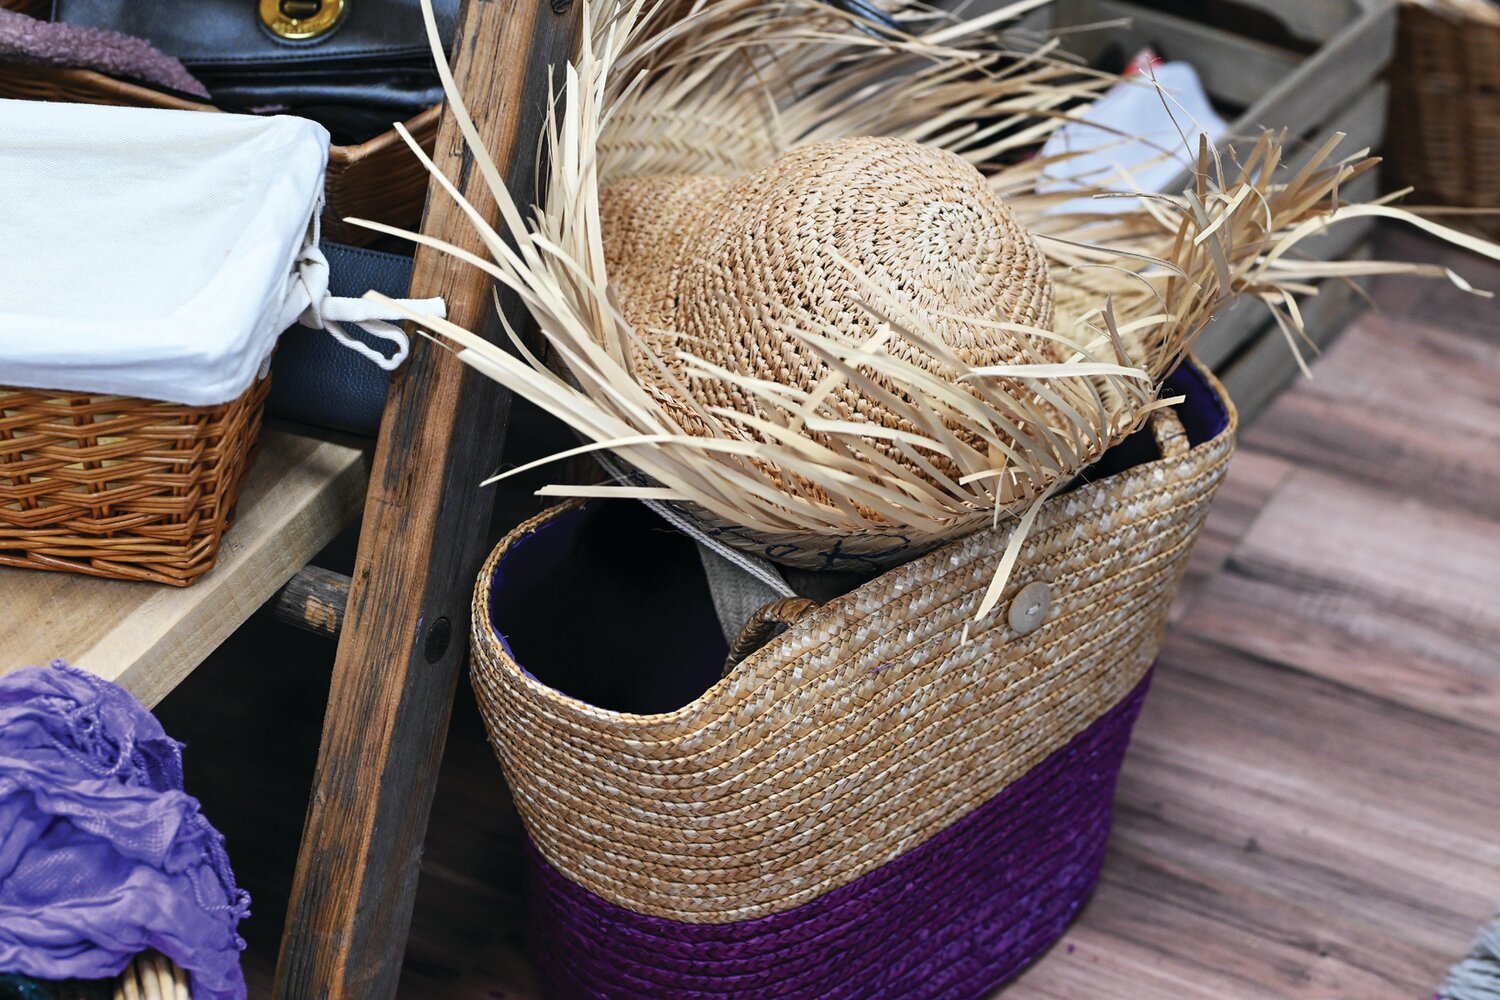 This straw hat and bag are among the unique items that can be found at Worthwhile Wear.